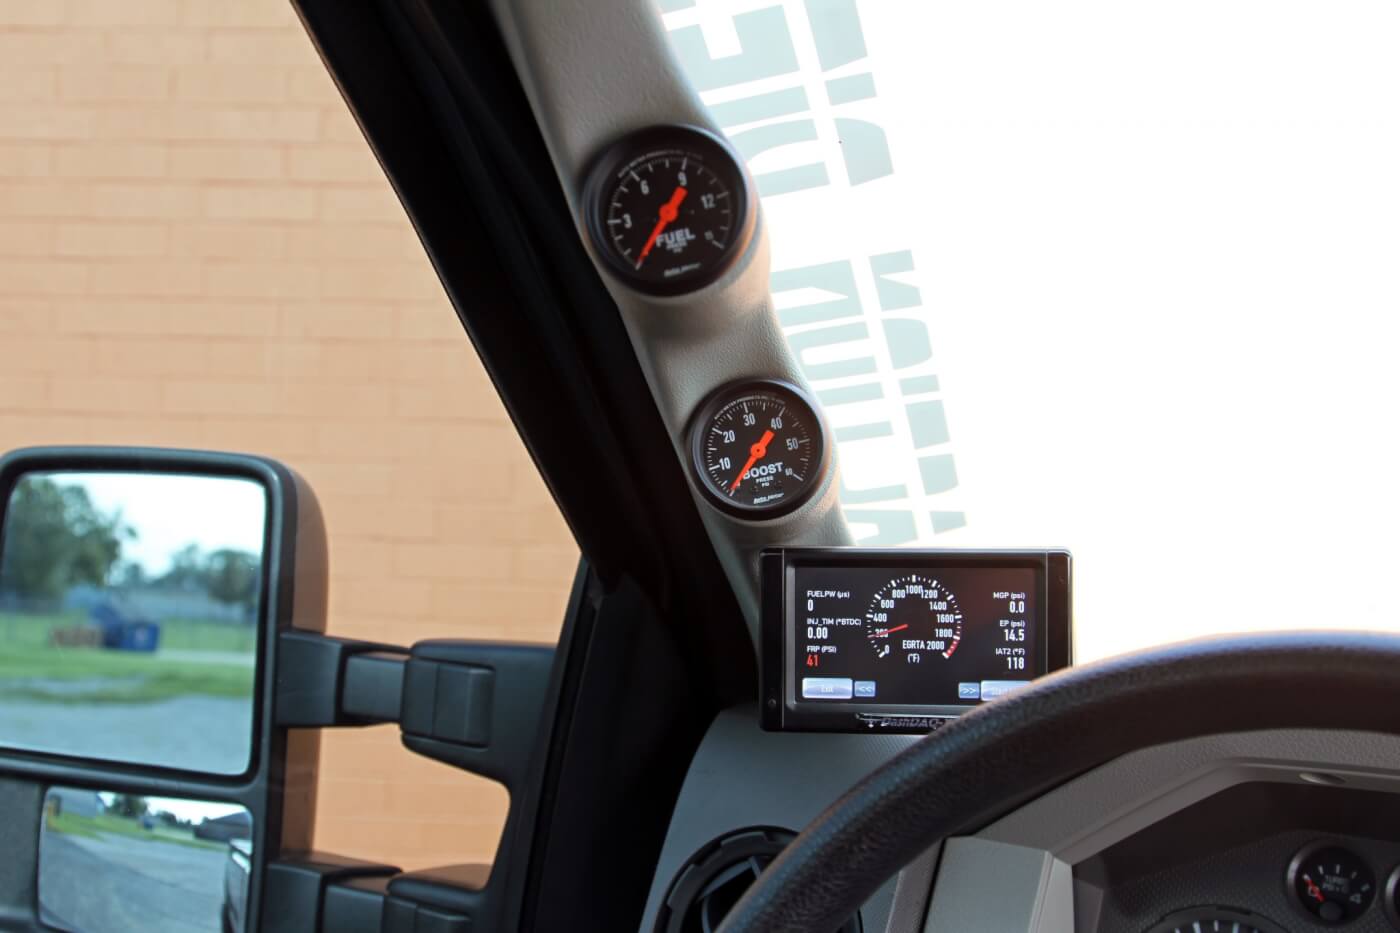 A-pillar-mounted DashDAQ monitor and Auto Meter boost and fuel pressure gauges give Lindenberg all the engine information he needs at a glance.